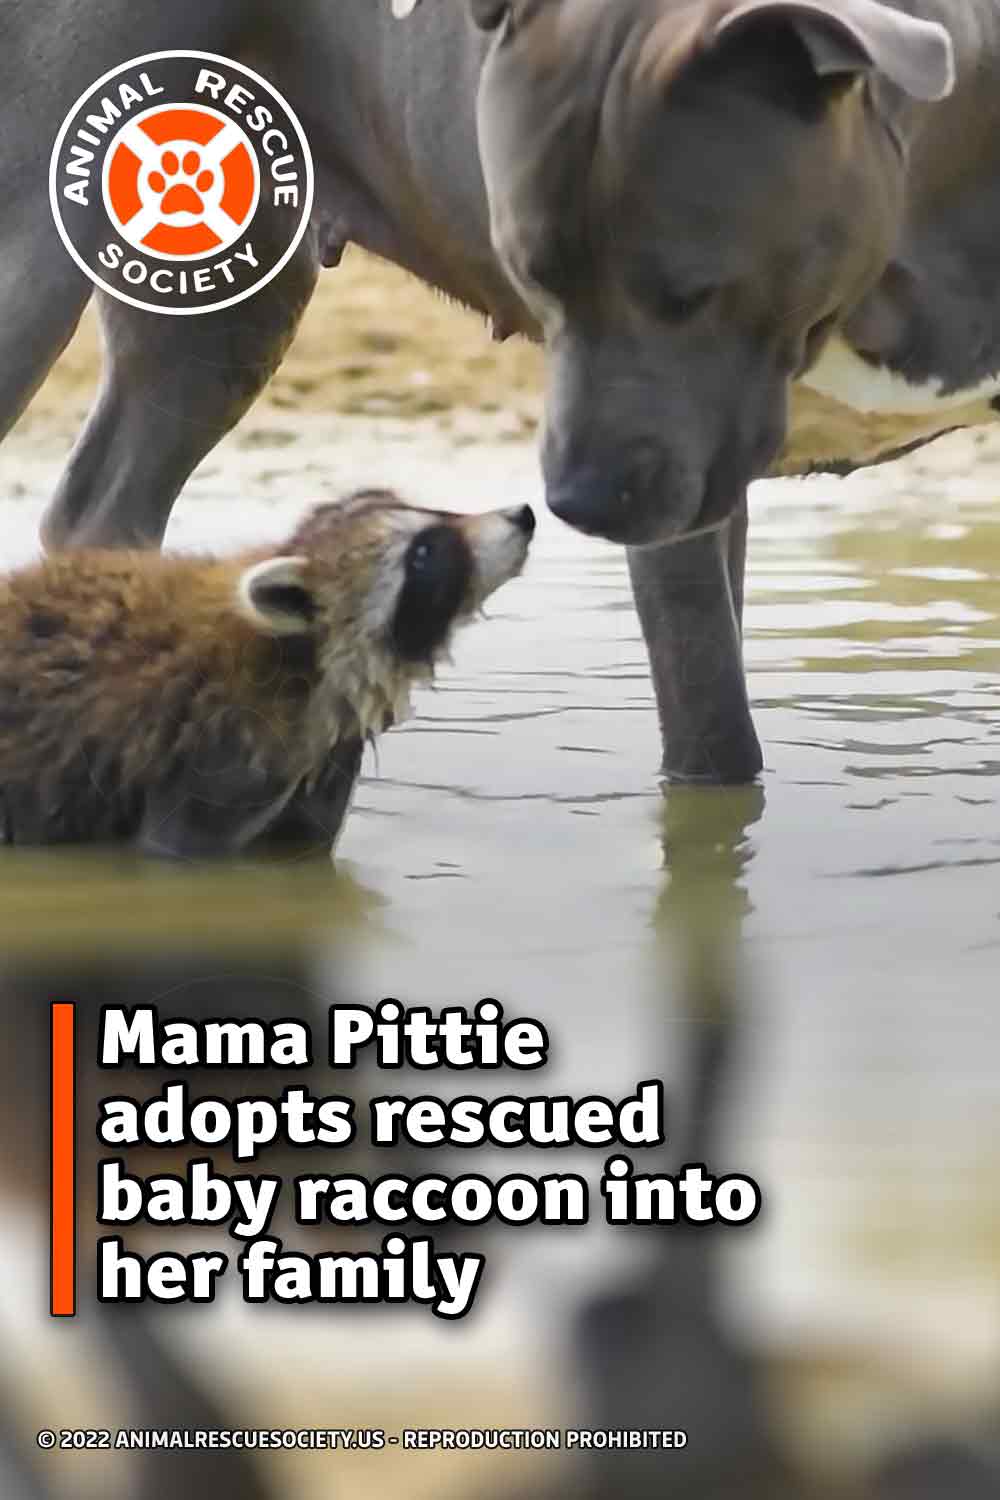 Mama Pittie adopts rescued baby raccoon into her family.